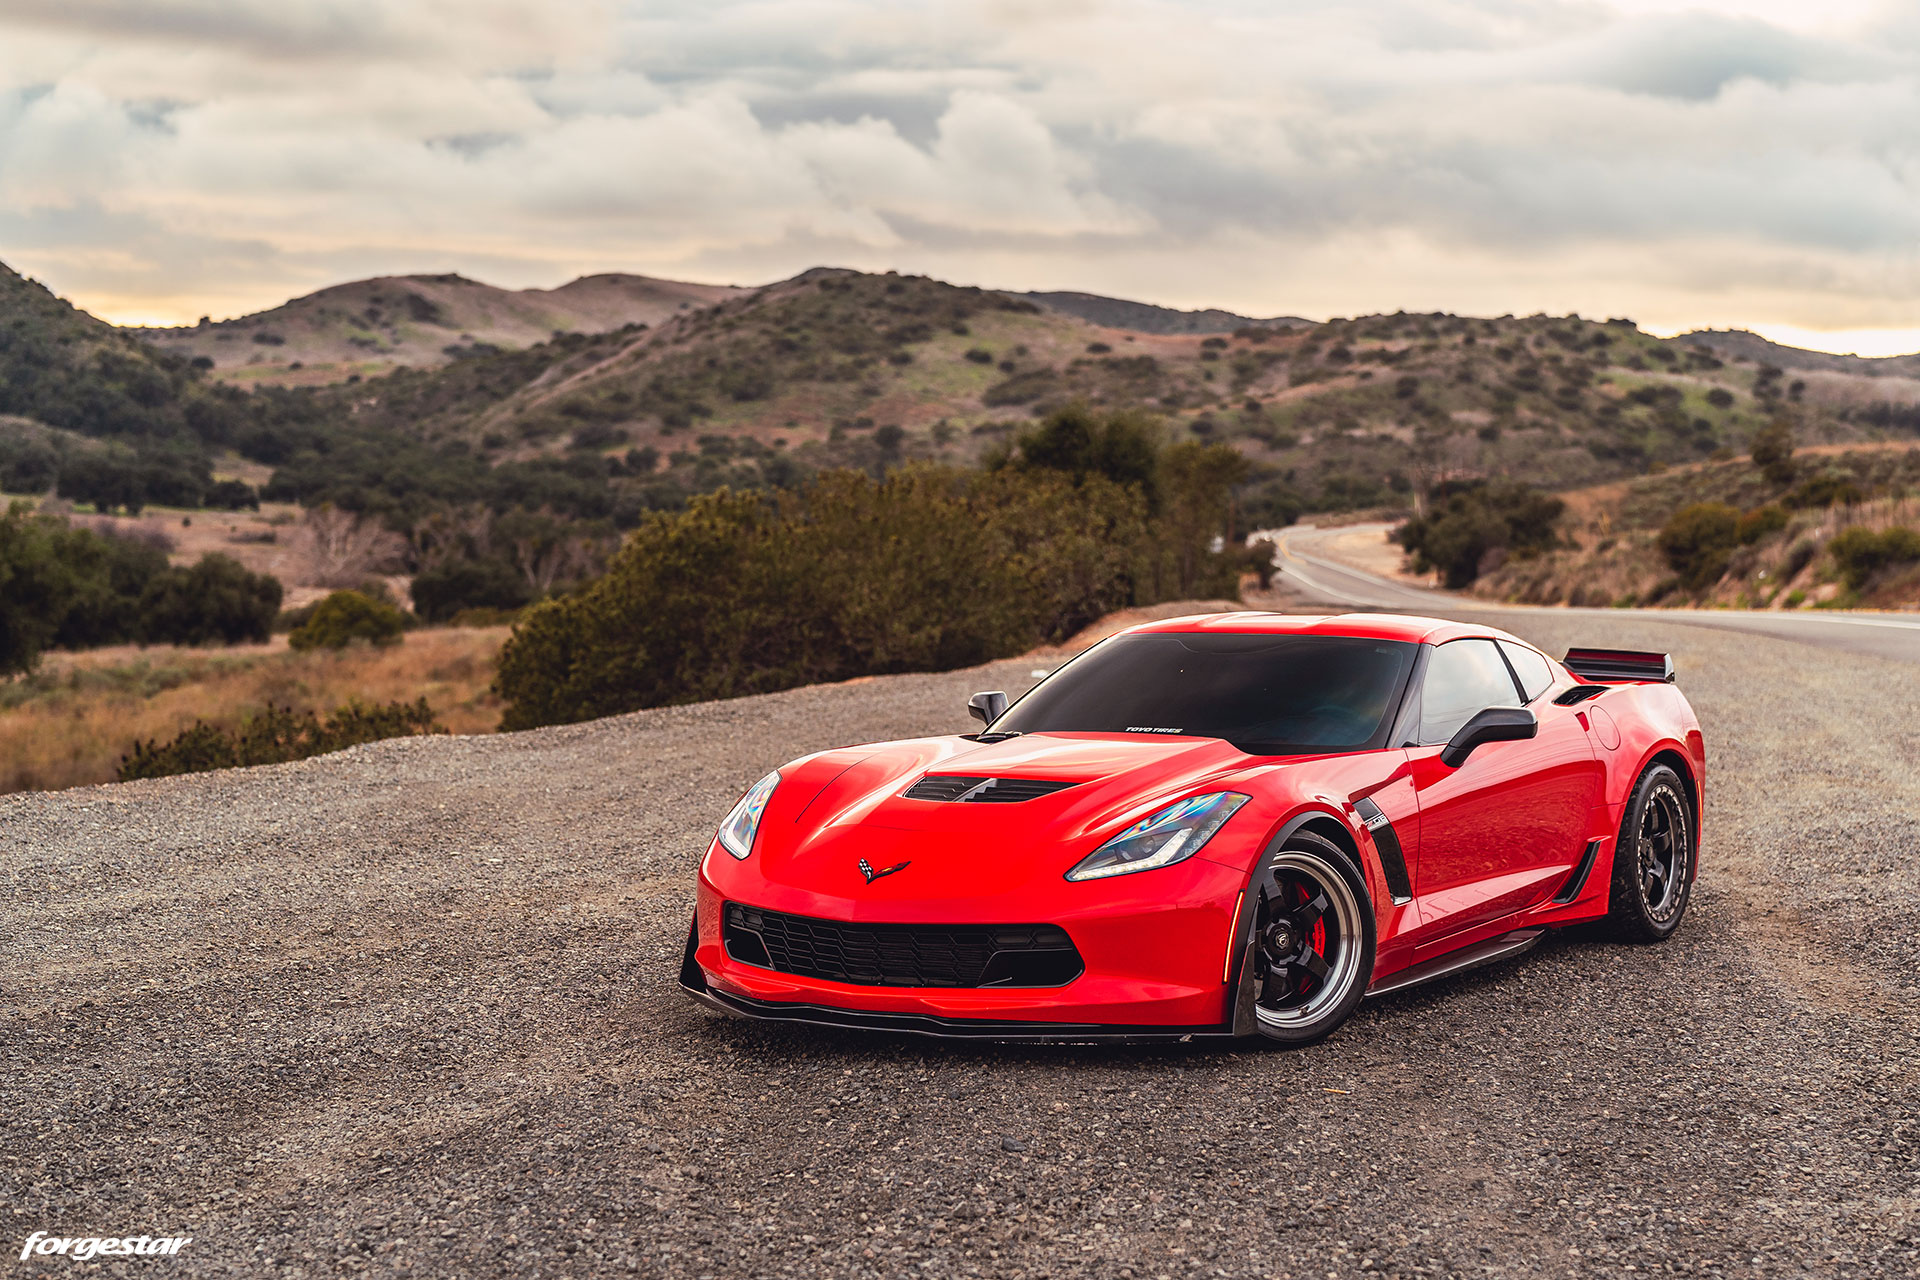 C7 Z06 Corvette with Forgestar 18x10 D5 Front Drag Wheels and 18x12 D5.